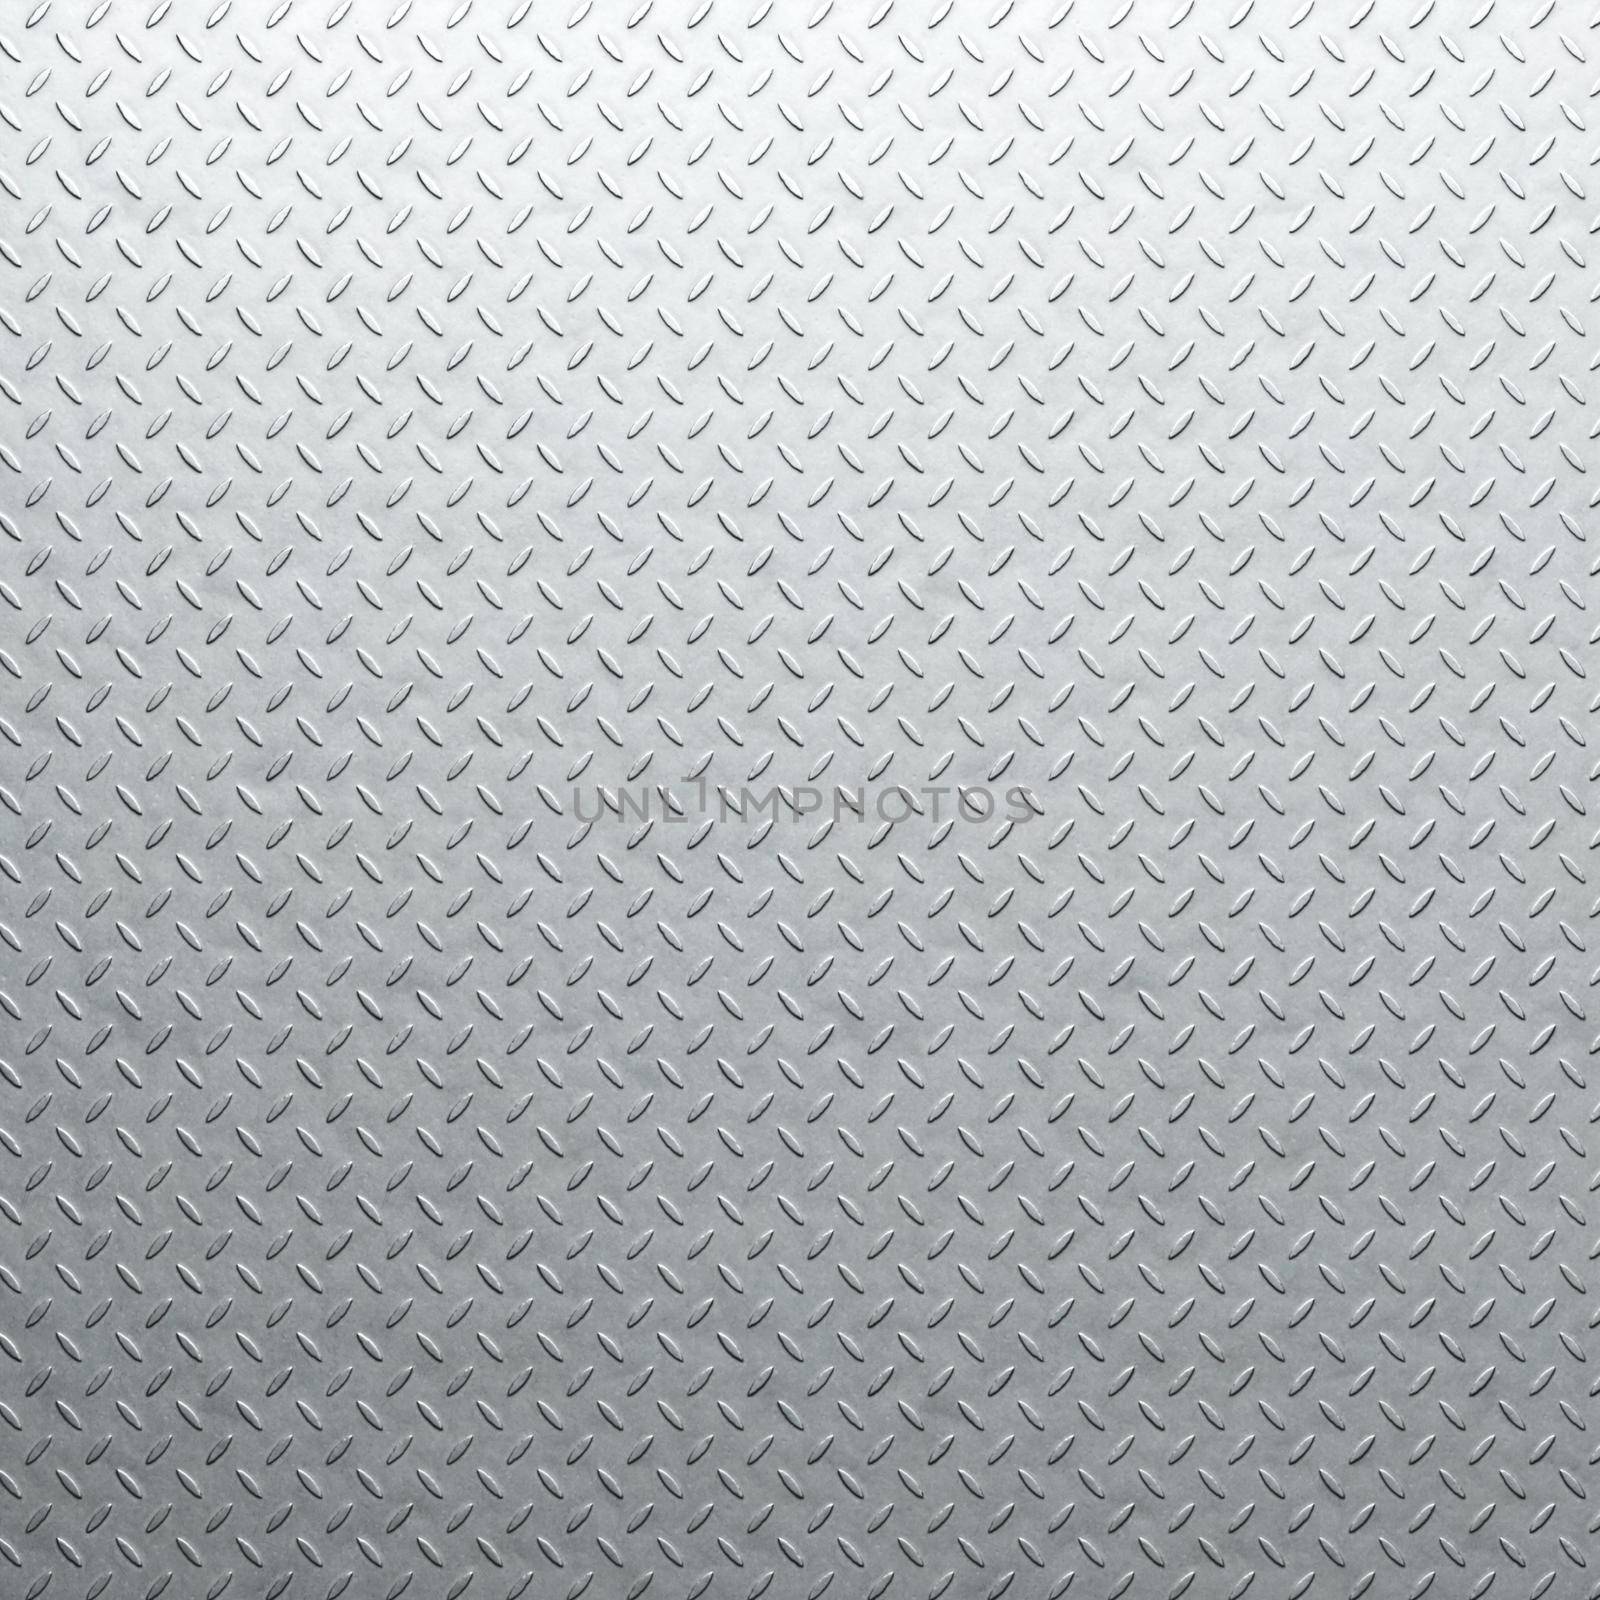 Diamond plate metal background. Brushed metallic texture. 3d rendering by Taut